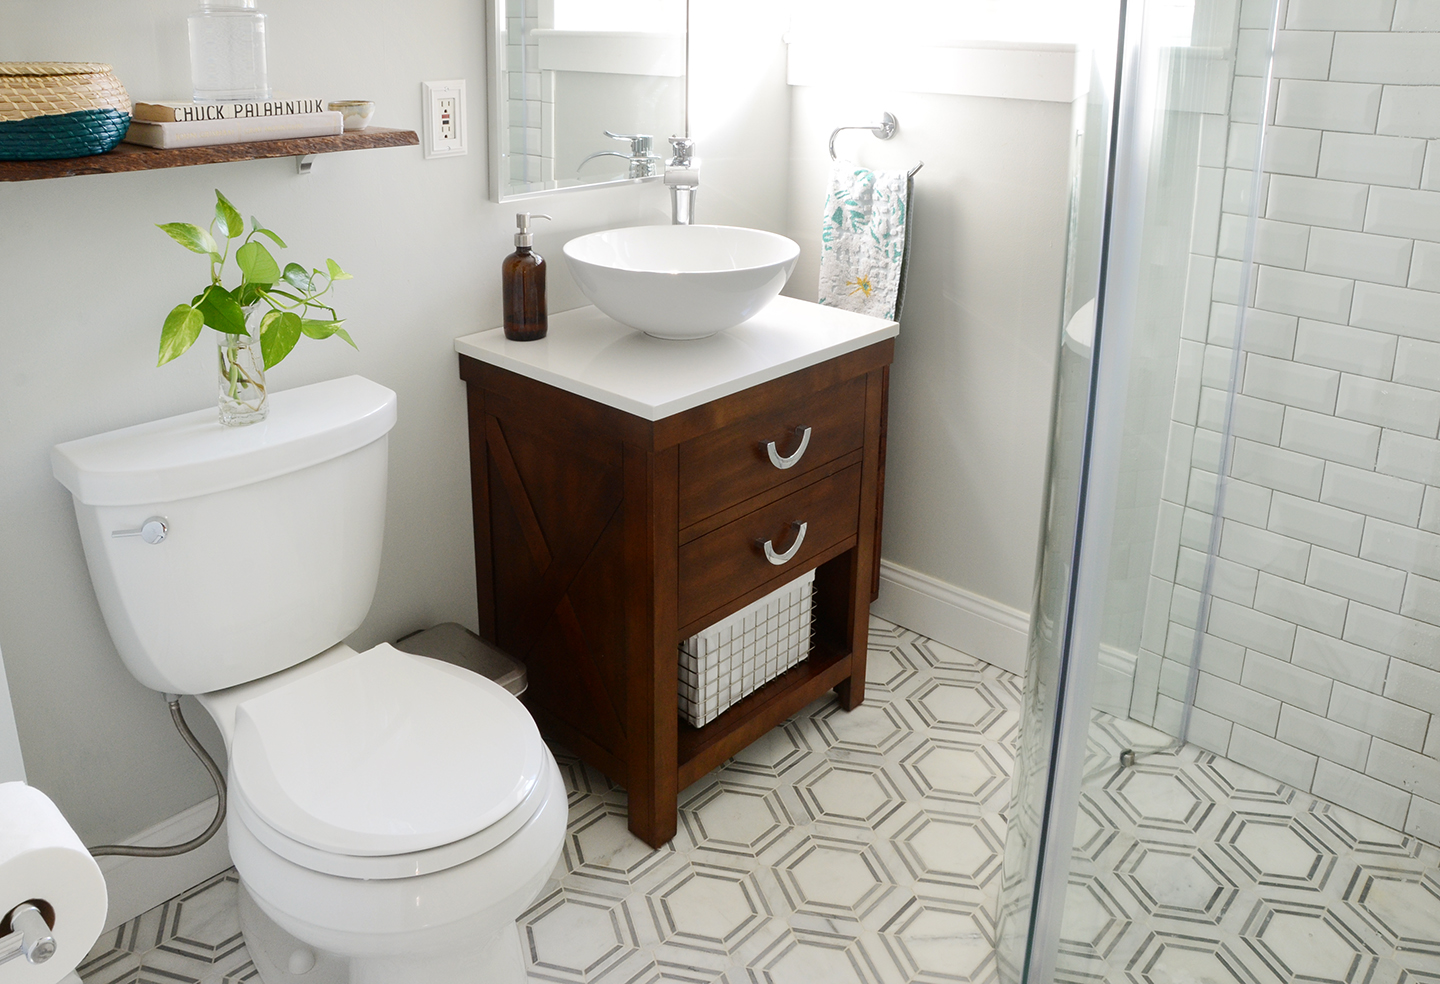 One Room Challenge: Small Bathroom Makeover Reveal! /// By Design Fixation #bathroom #small #tile